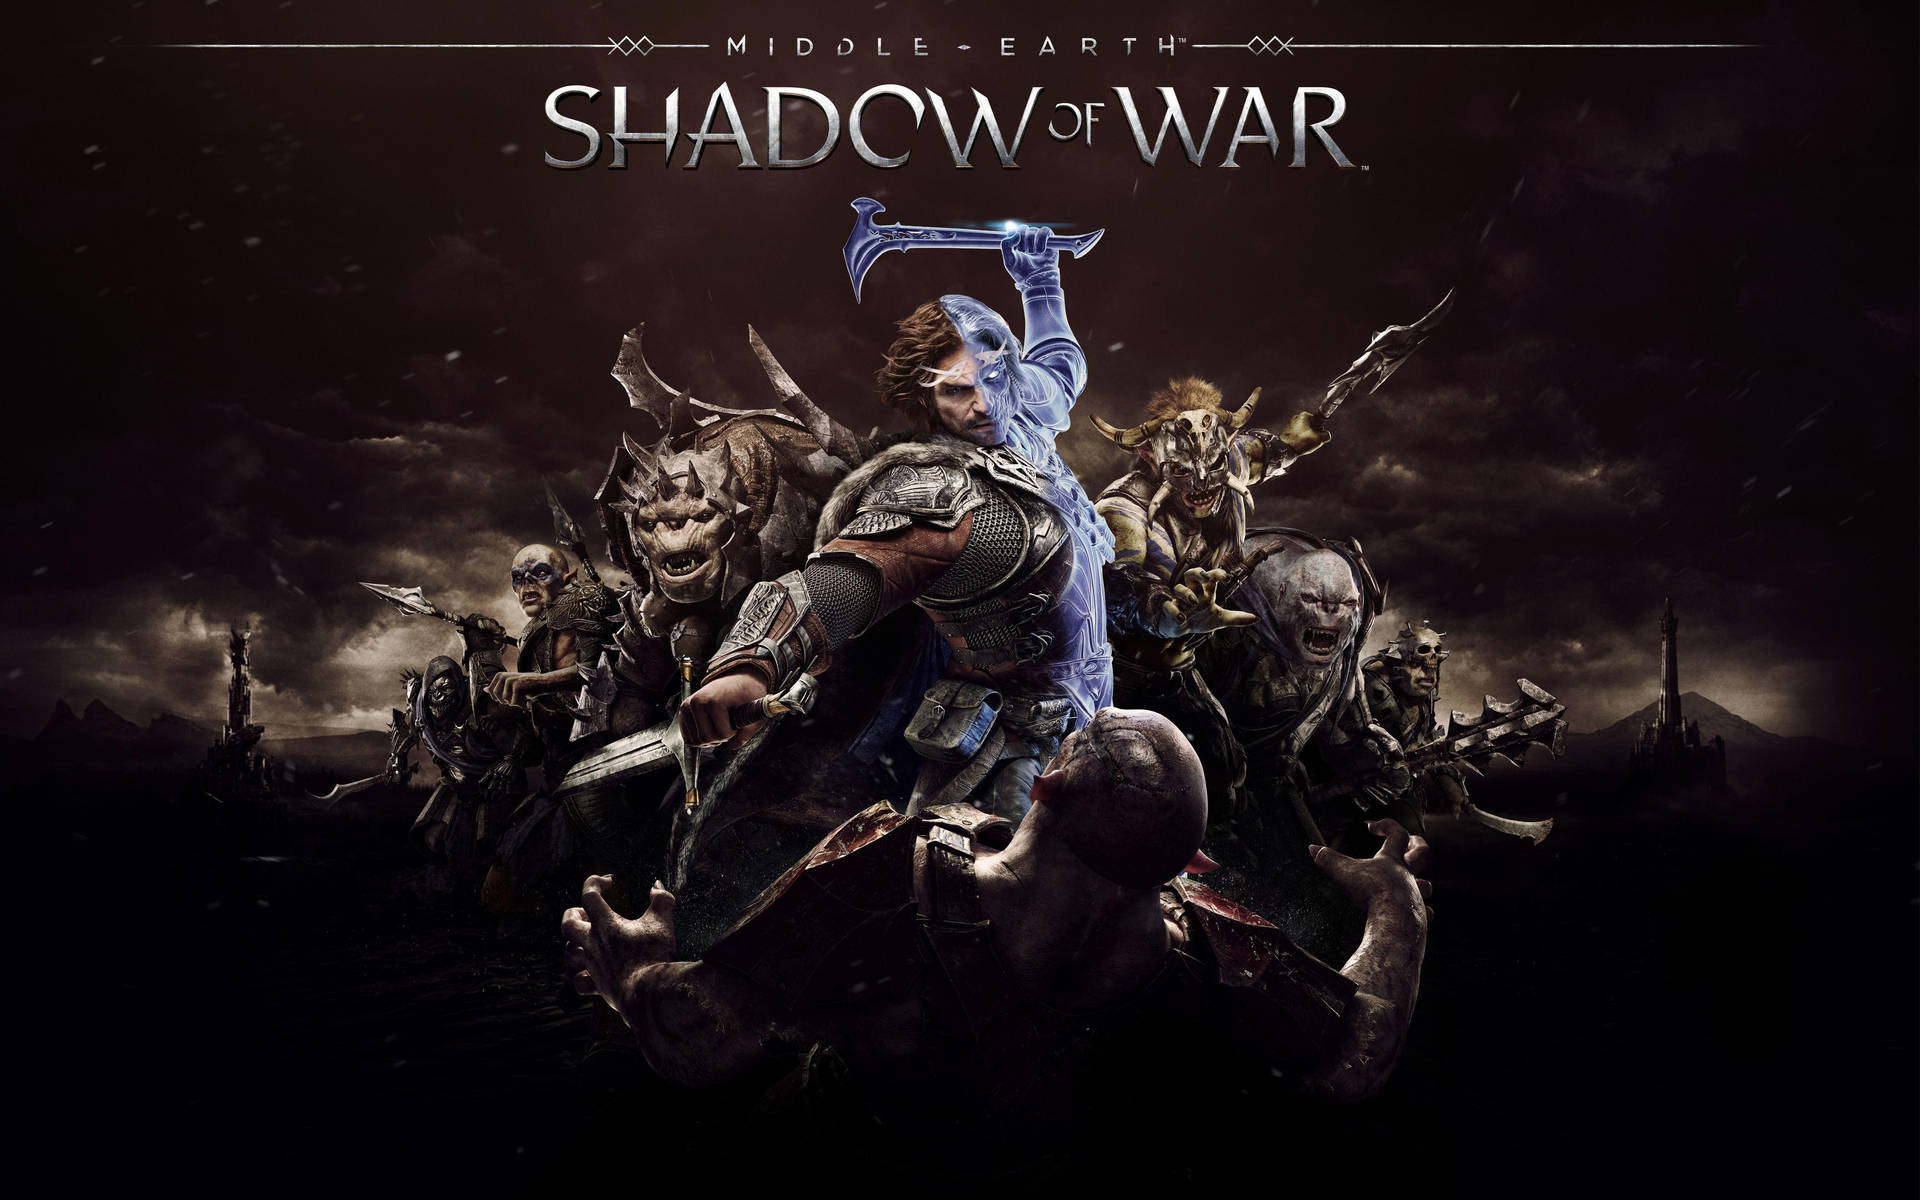 Caption: Heroes Of Middle Earth: Battle In Shadow Of War Background